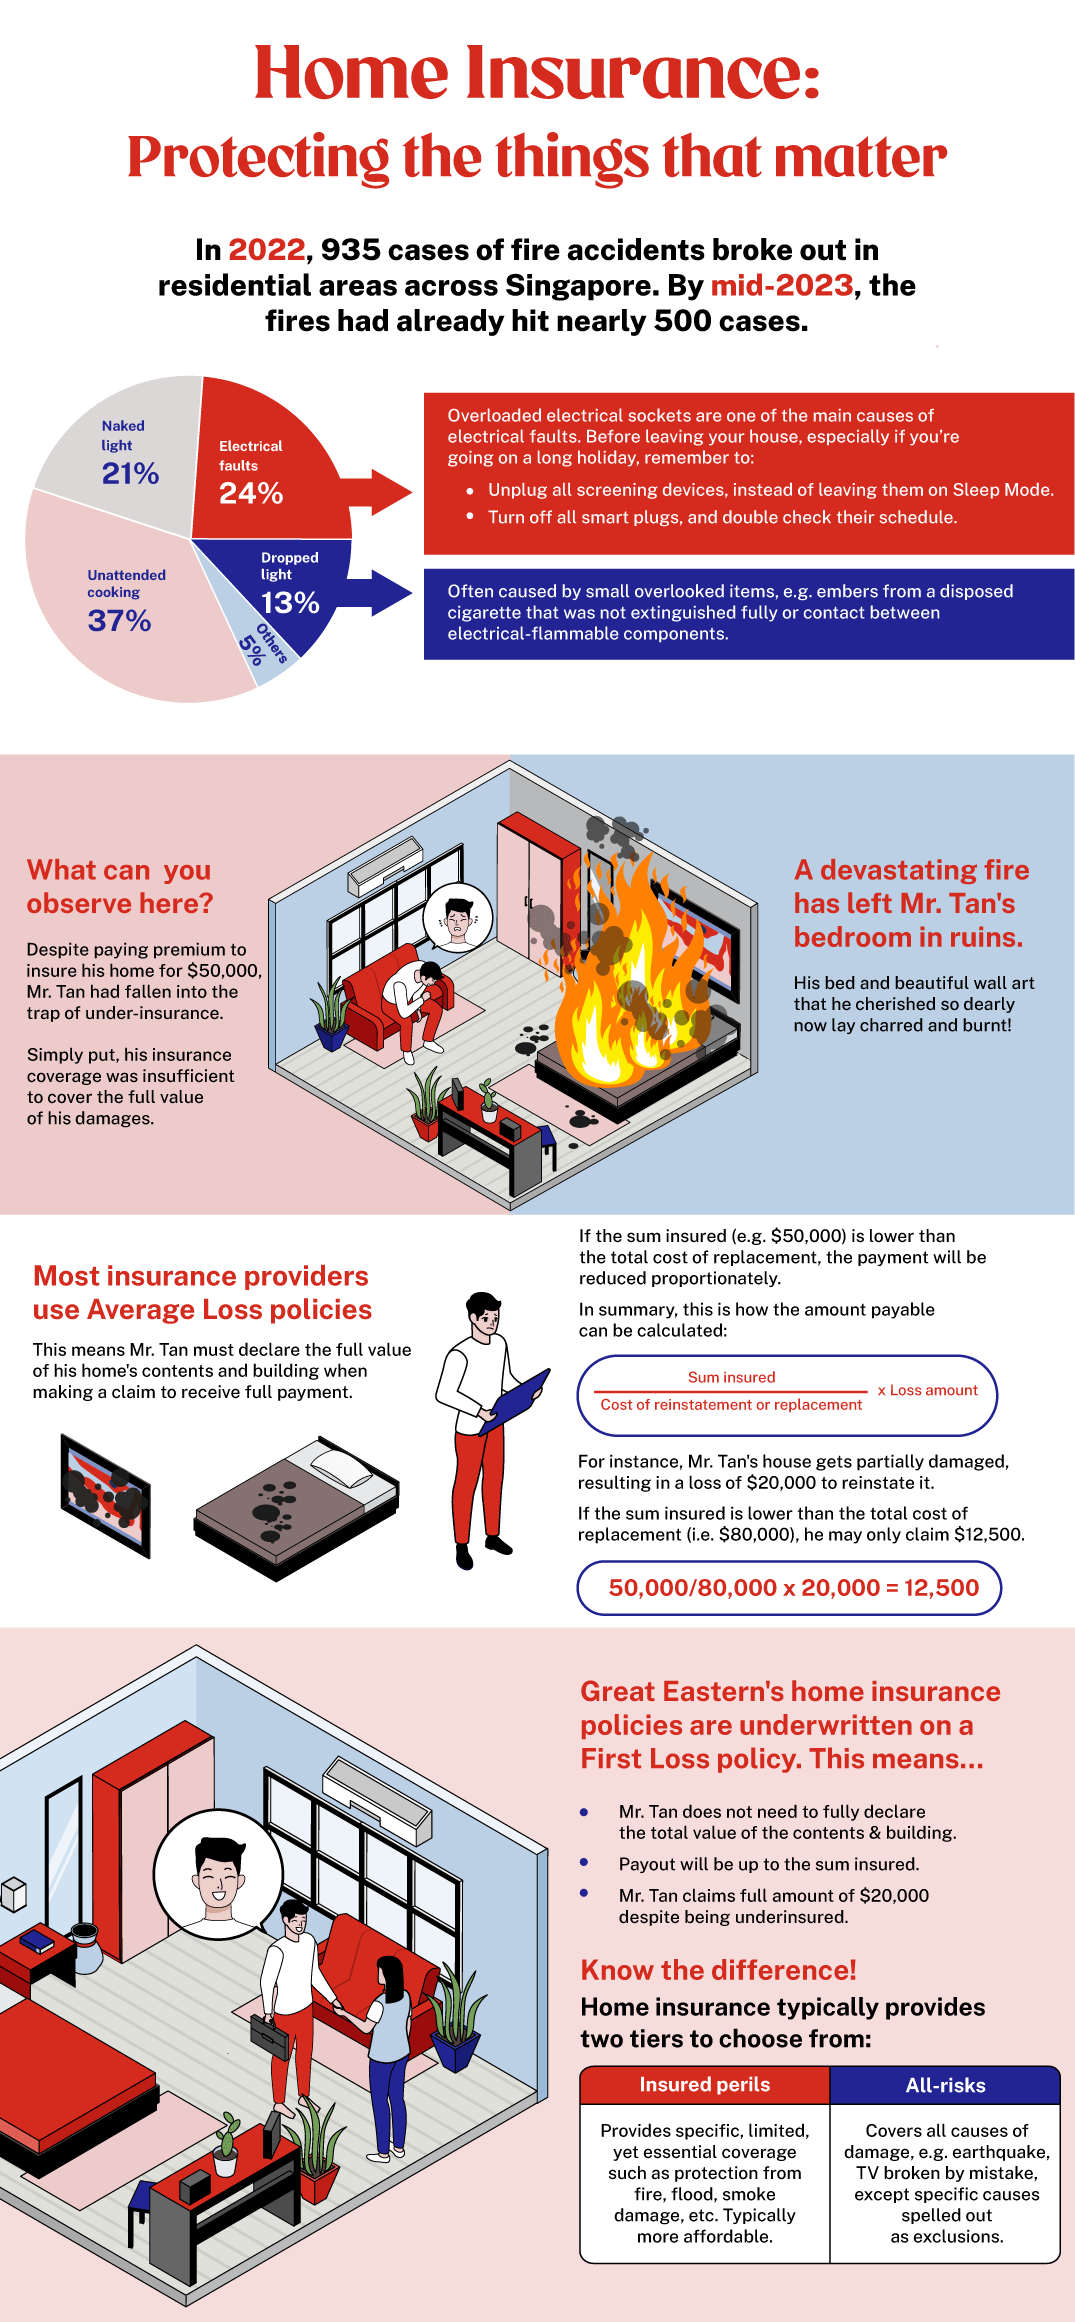 5 common reasons for house fires in Singapore